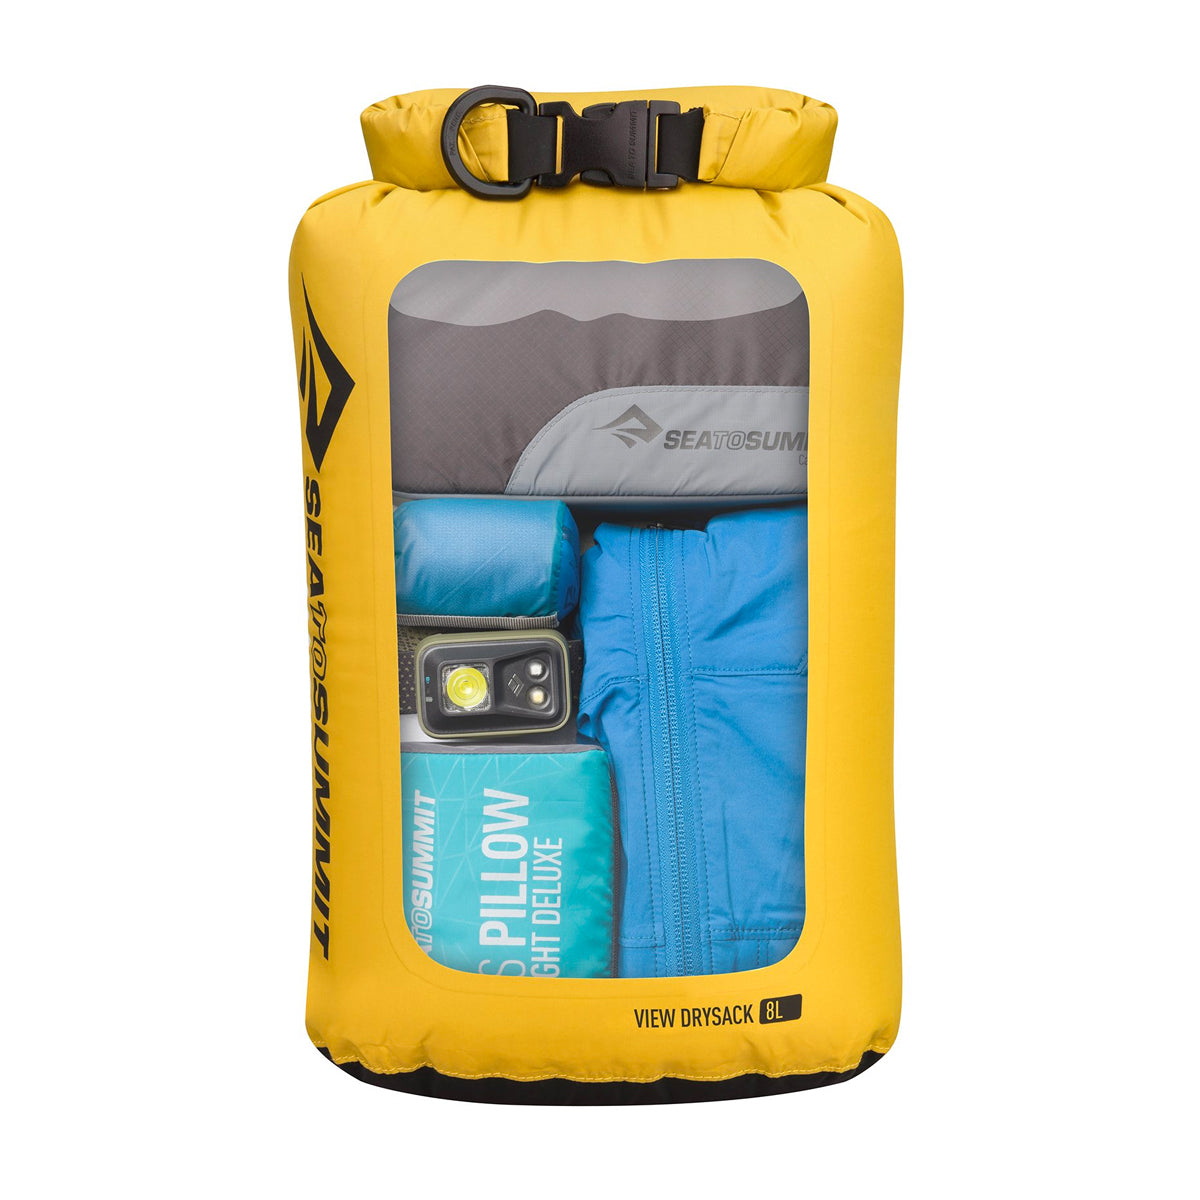 Sea to Summit View Dry Bag in Sea to Summit View Dry Bag by Sea to Summit | Gear - goHUNT Shop by GOHUNT | Sea to Summit - GOHUNT Shop